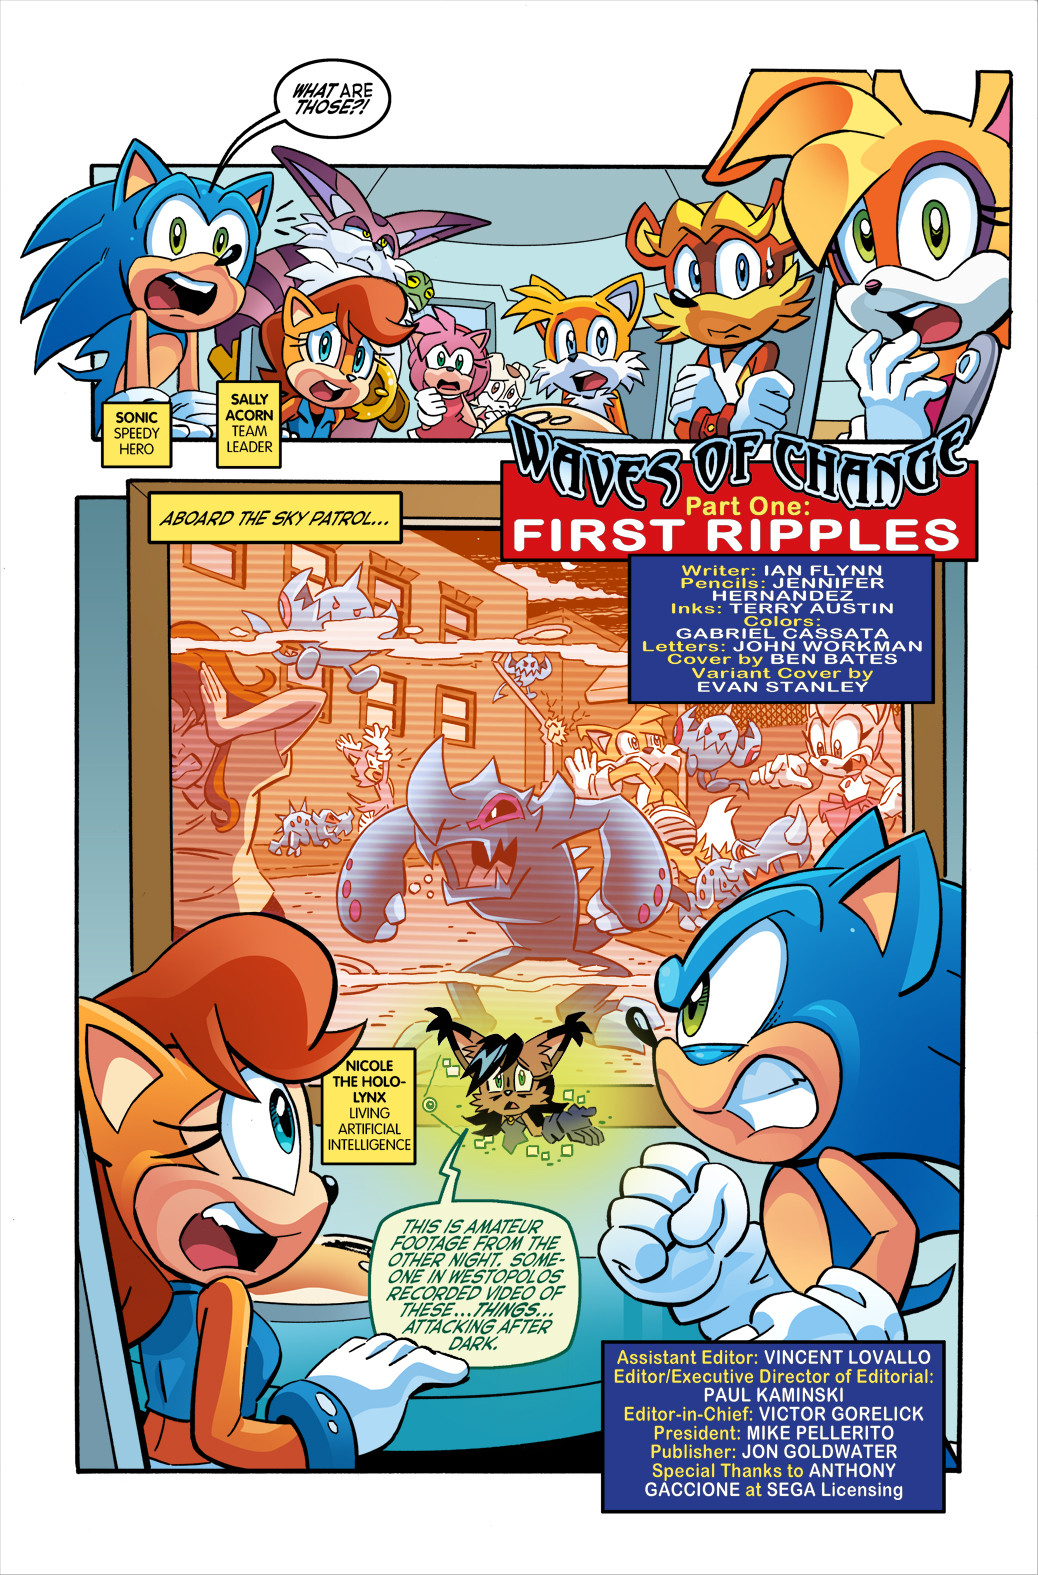 SONIC THE HEDGEHOG - #260, page 1